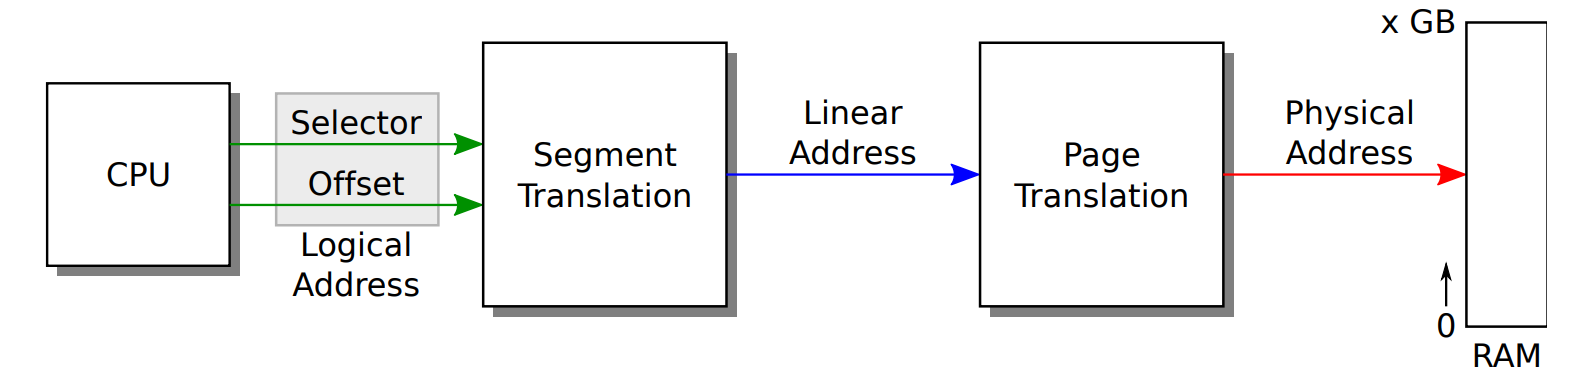 relationship between logical，linear，physical address